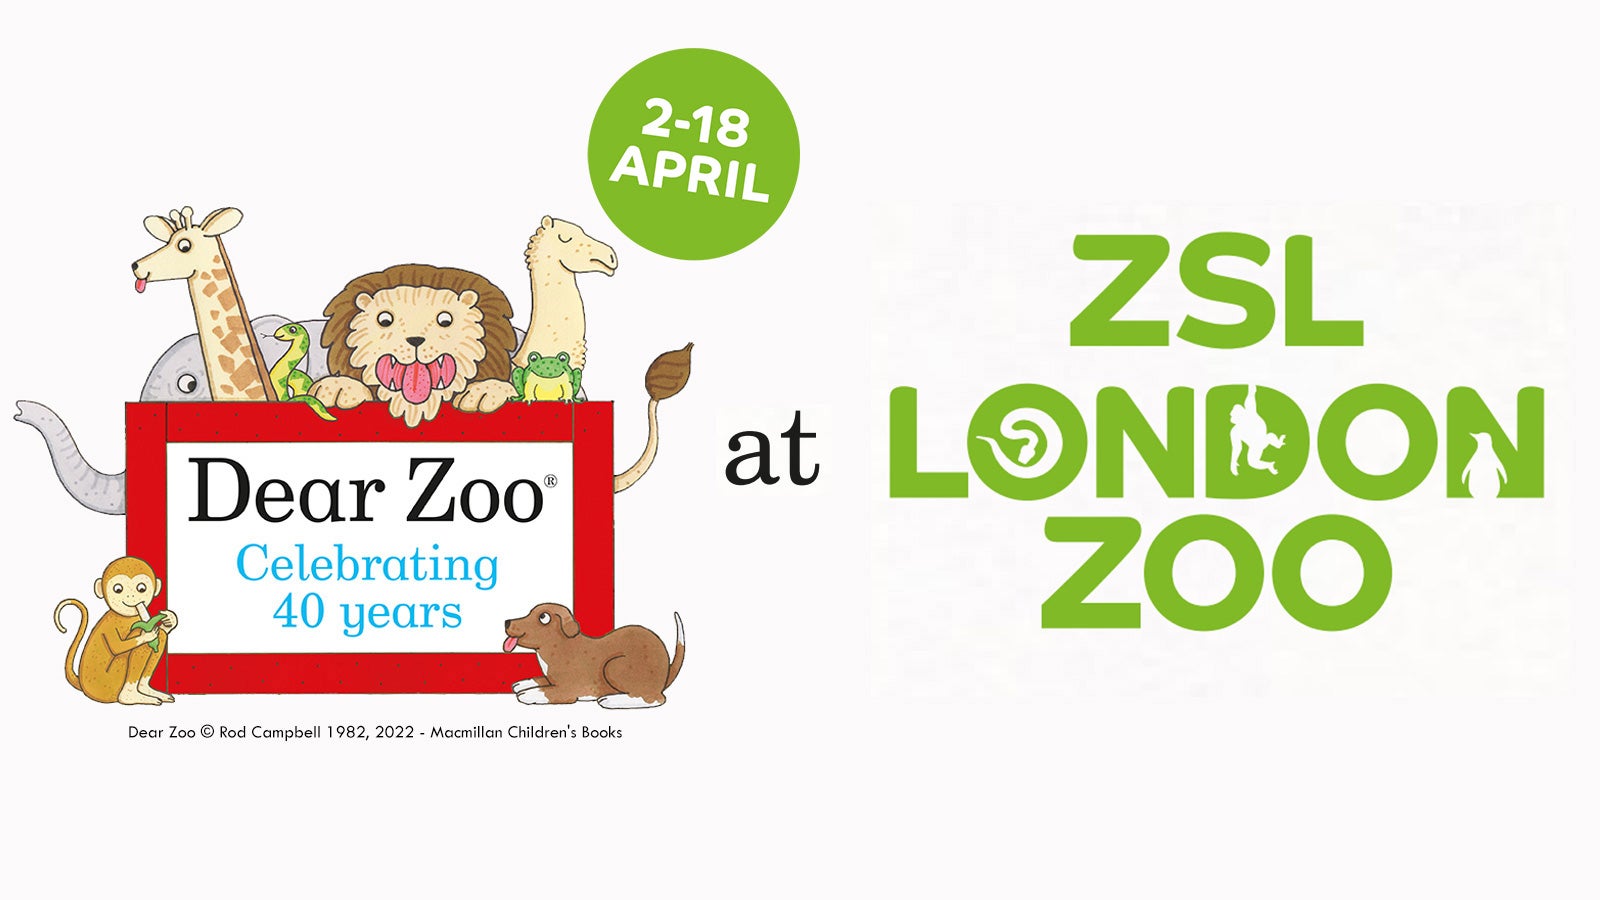 An illustration of Dear Zoo: Celebrating 40 years alongside the ZSL London Zoo logo and a roundel that says 2 - 18 April